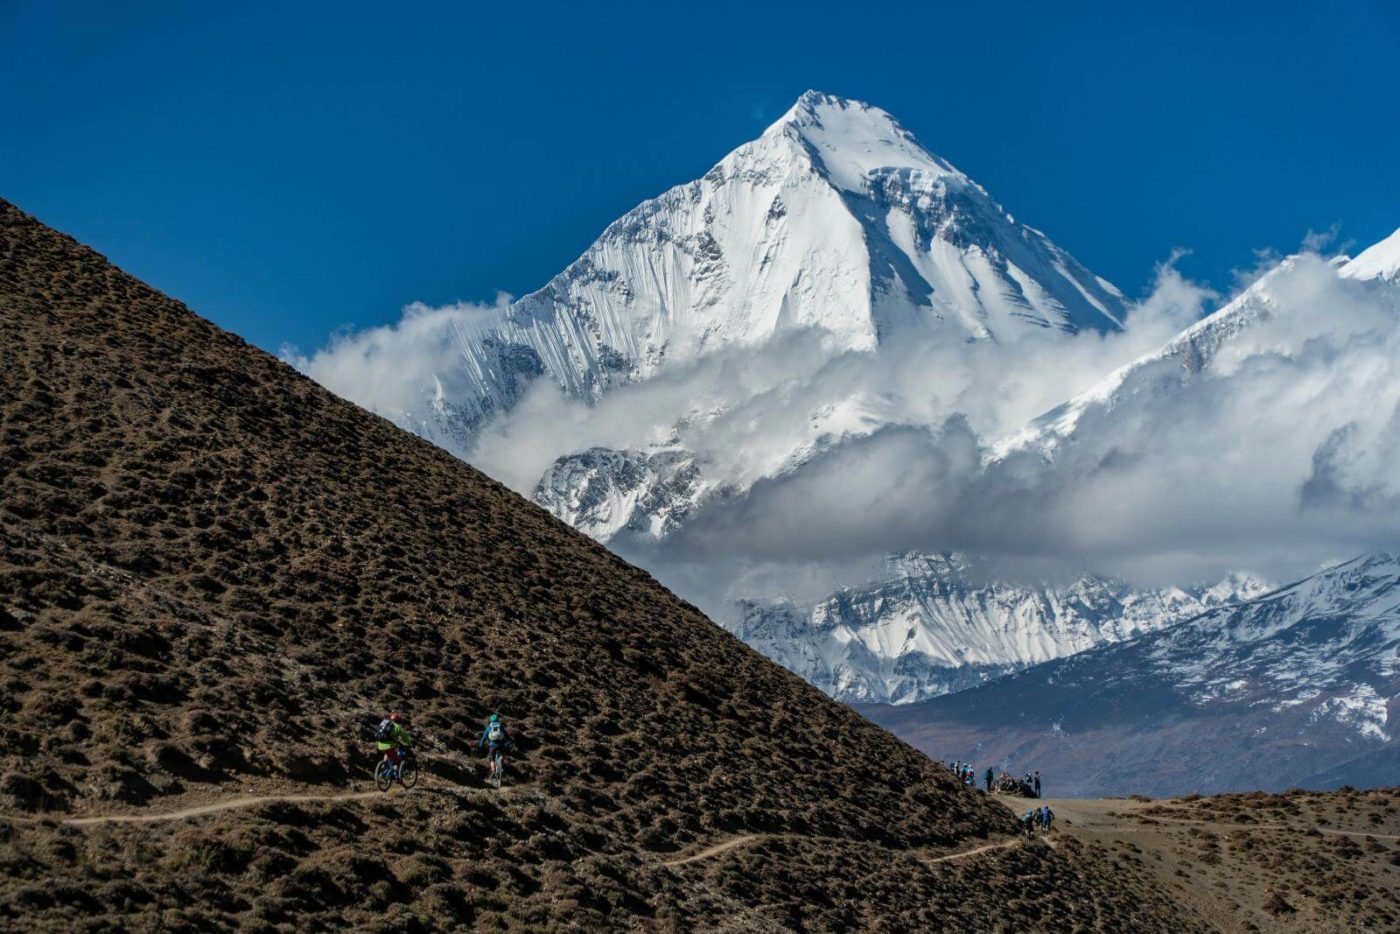 Dhaulaghiri Mountain Peak, as seen from the trail on the bike tour in Nepal